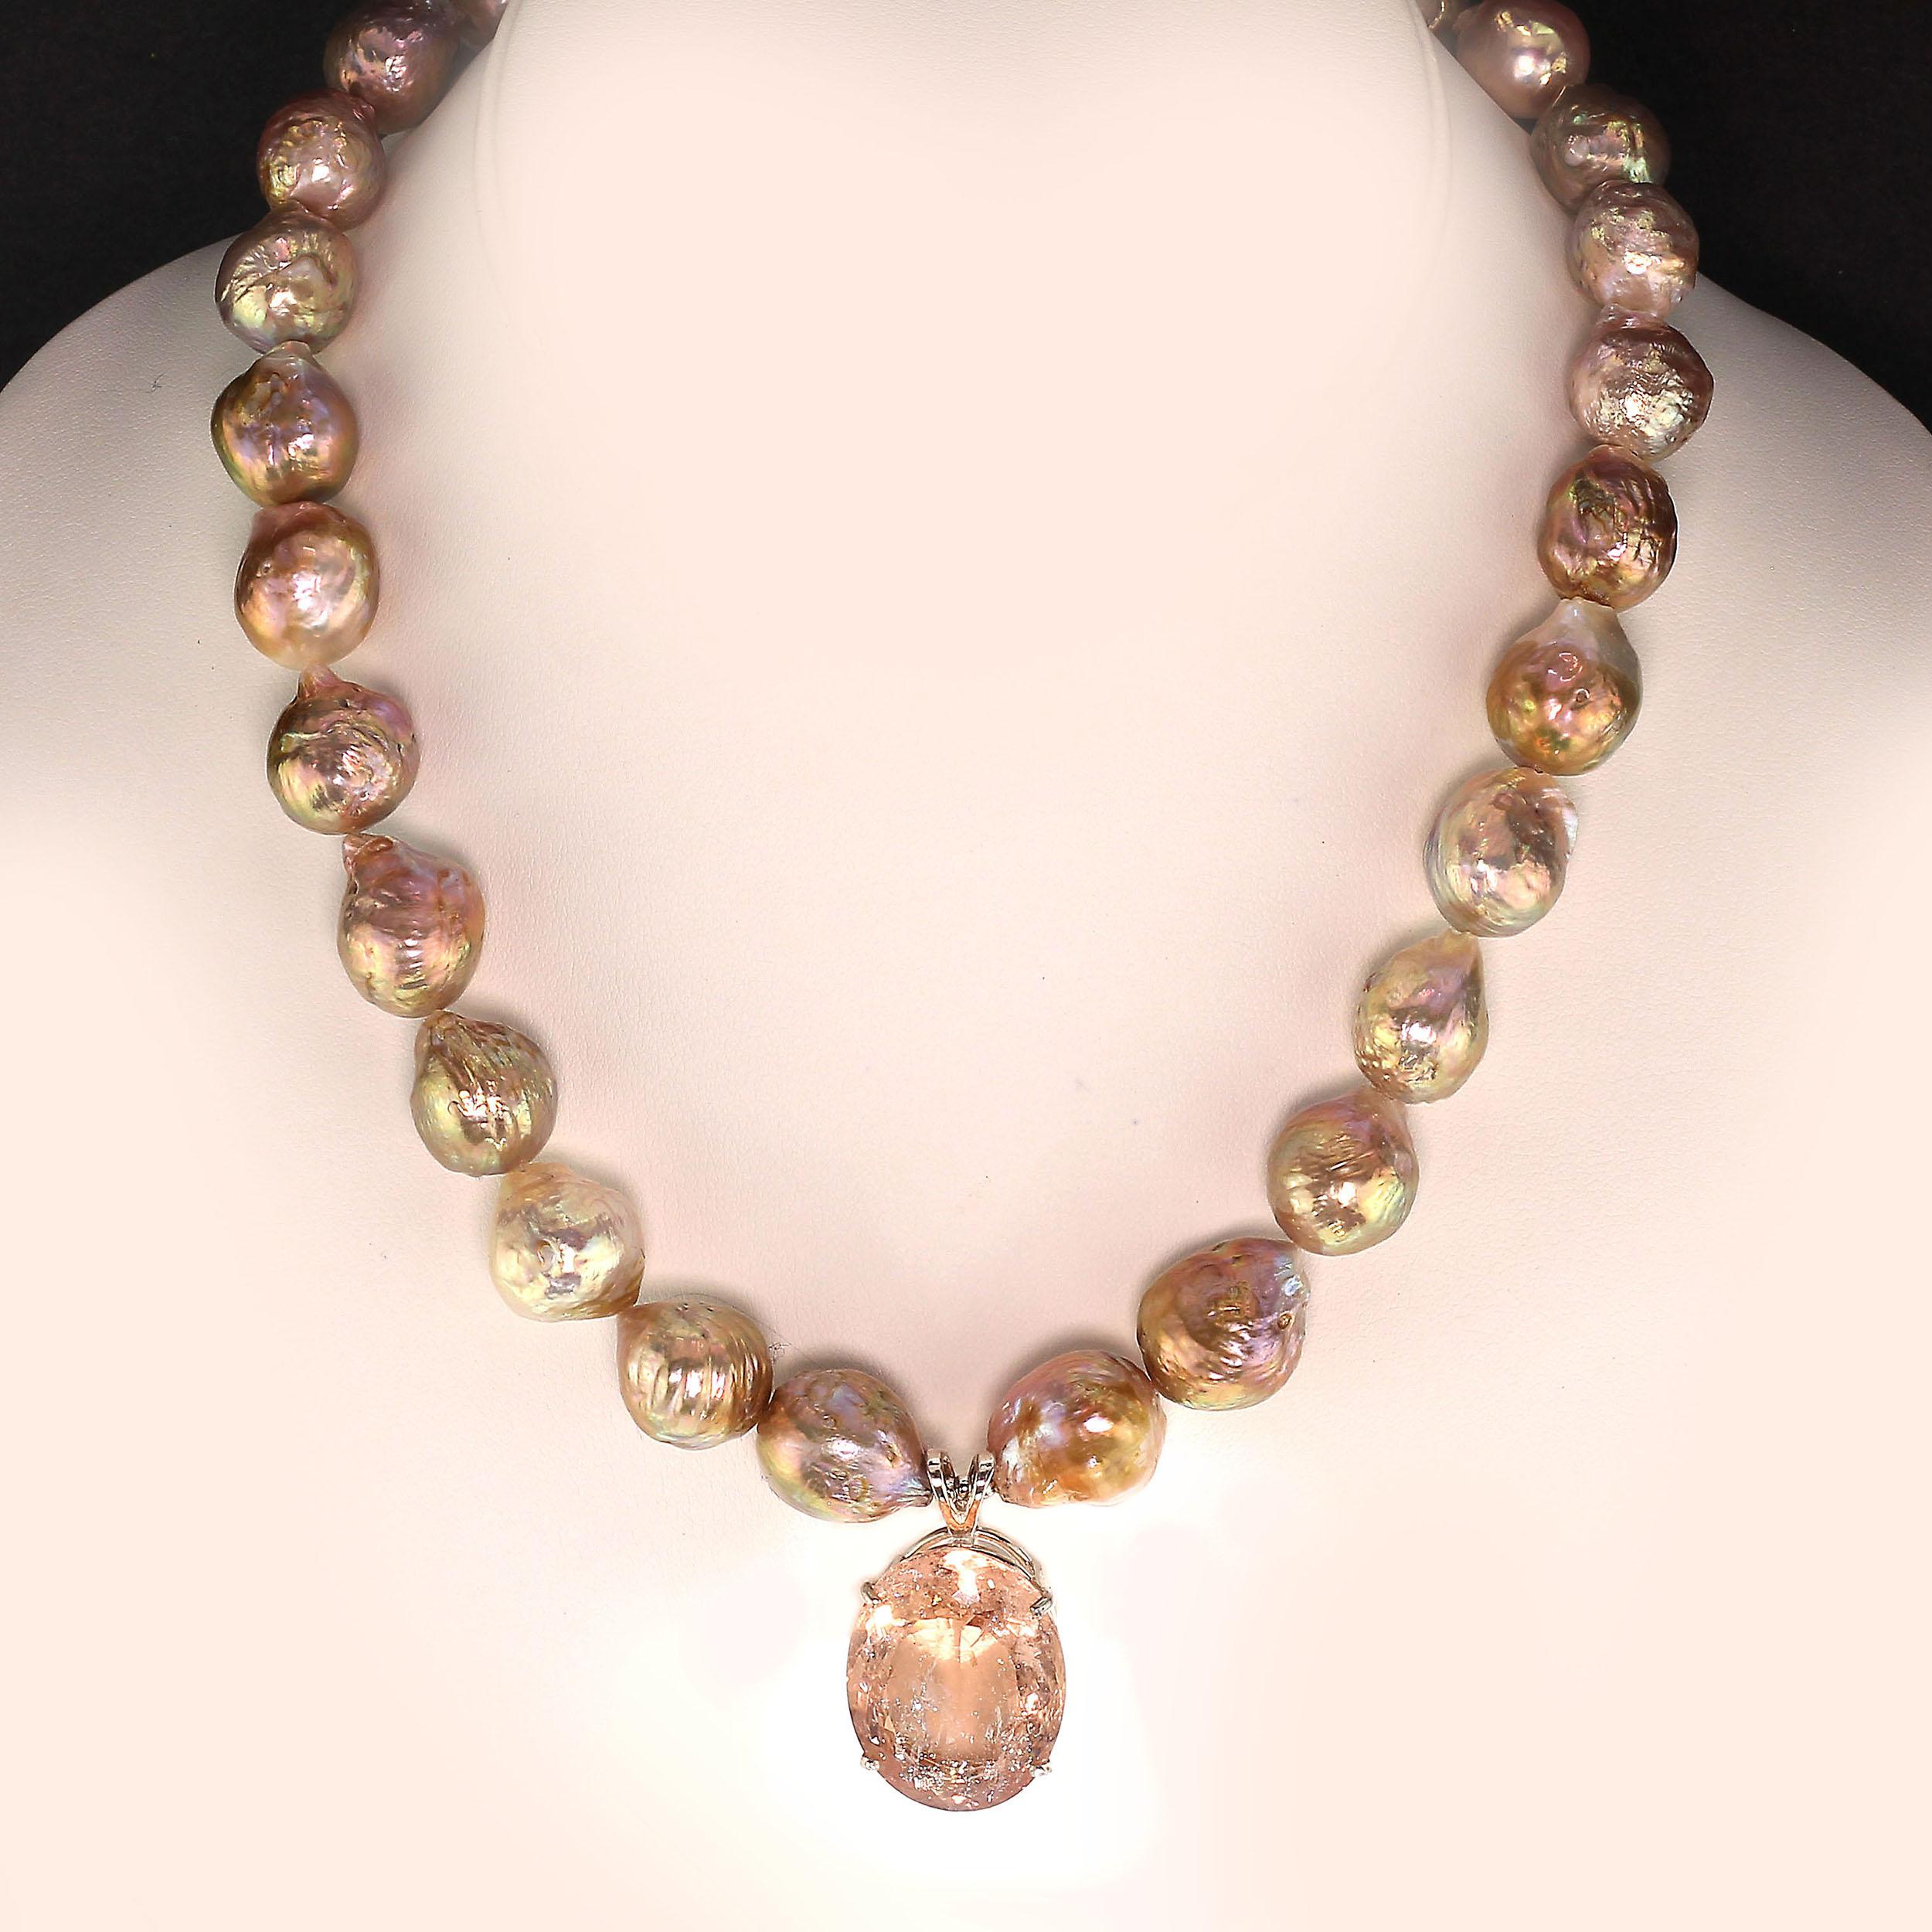 Keep Calm and Wear Pearls

Custom made, sparkling, 32.99 Carat, Peach Oval Morganite in Sterling Silver Pendant on gorgeous pearl necklace. This lively morganite is made more so with all the delightful inclusions natural to beryls. The generous